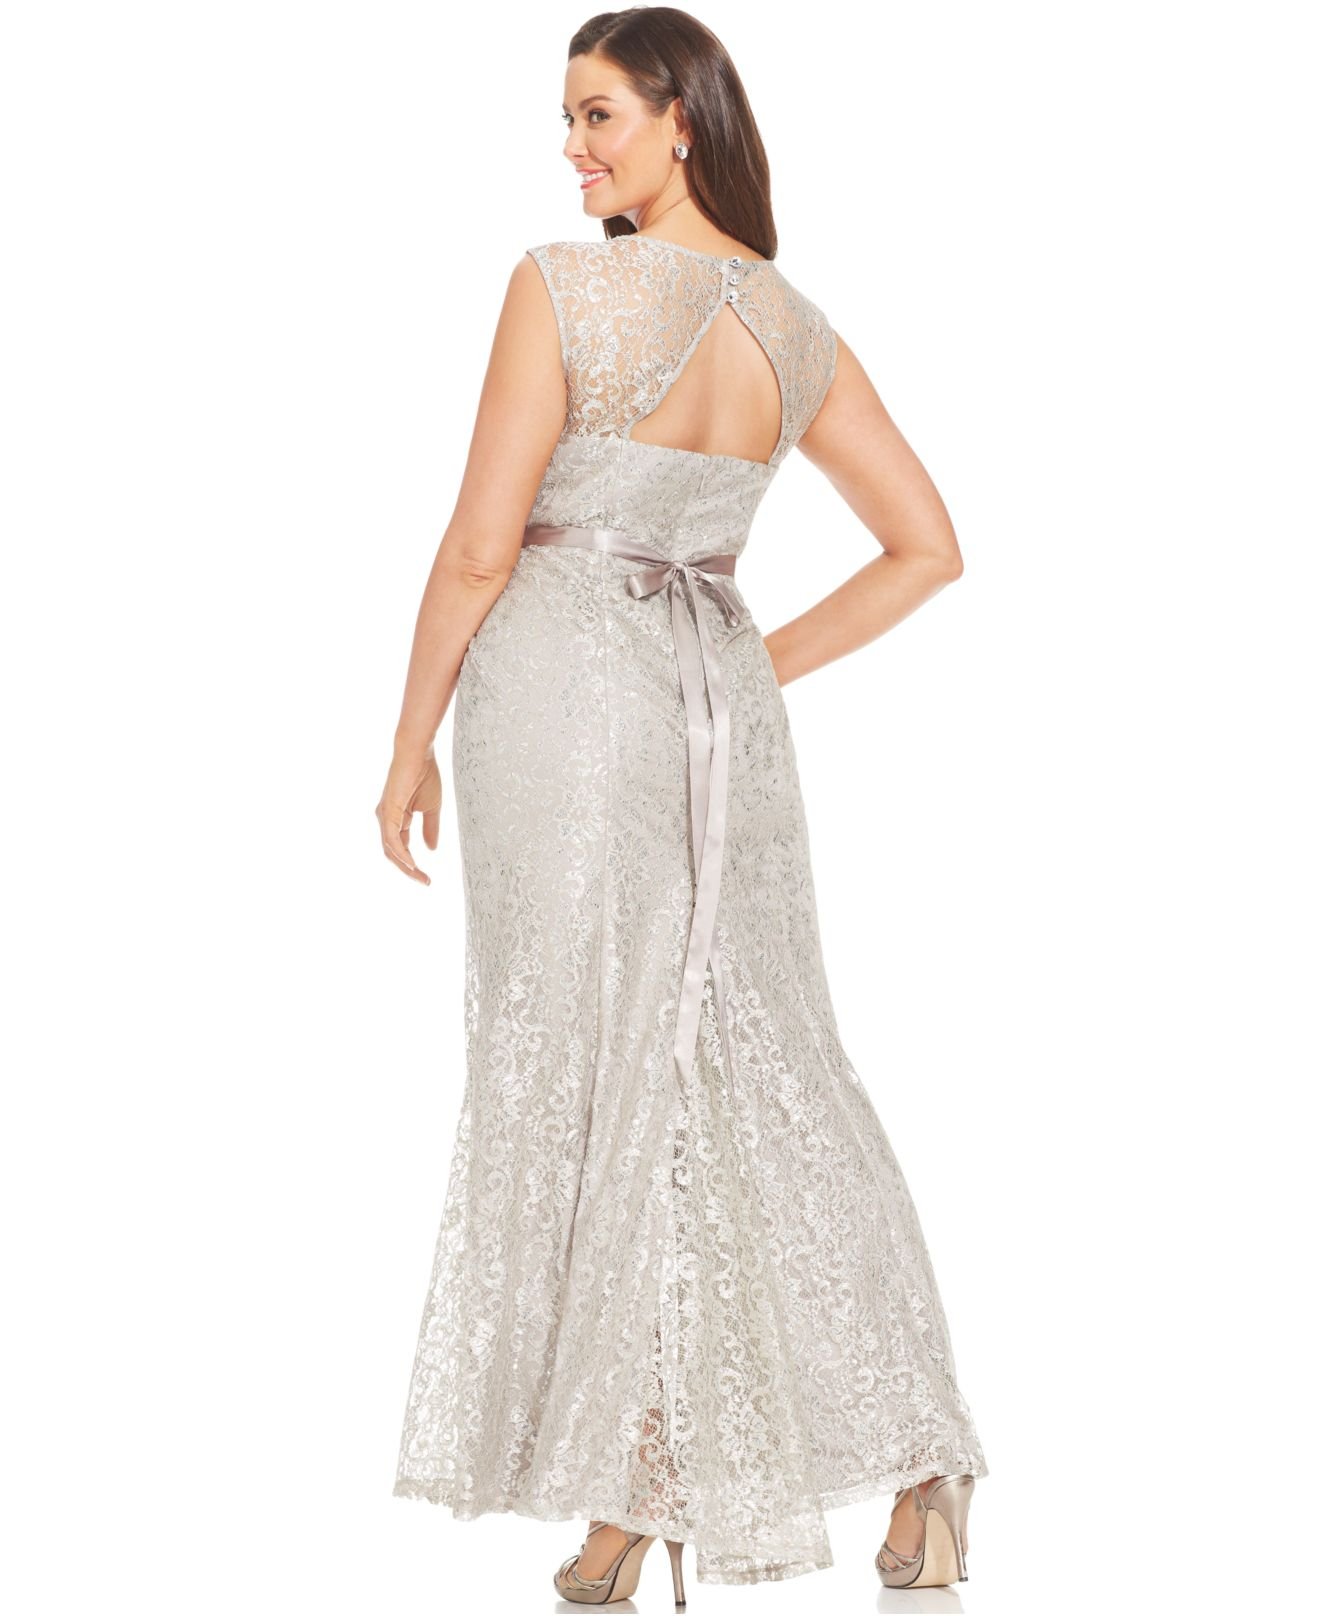 Lyst - Betsy & Adam Plus Size Metallic Lace Pleated Gown in Metallic